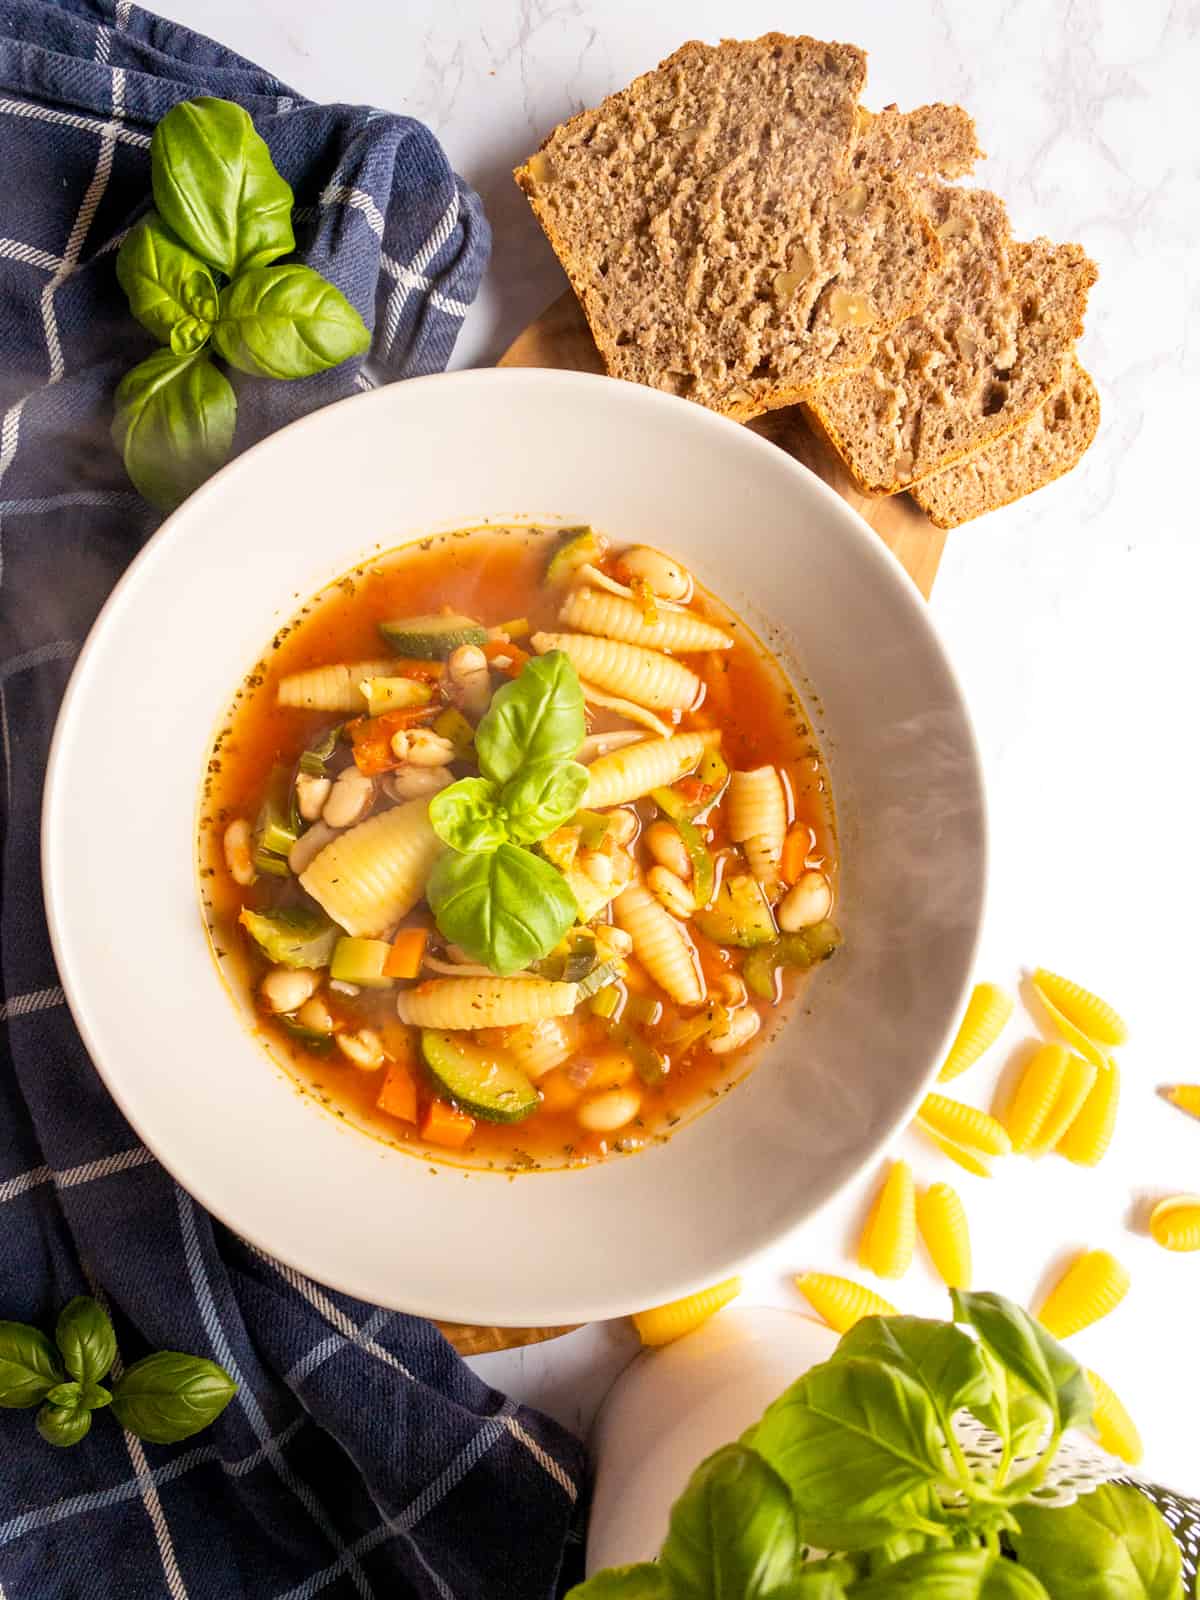 vegan minestrone soup with pasta shells in a white bowl on a white countertop with bread on the side